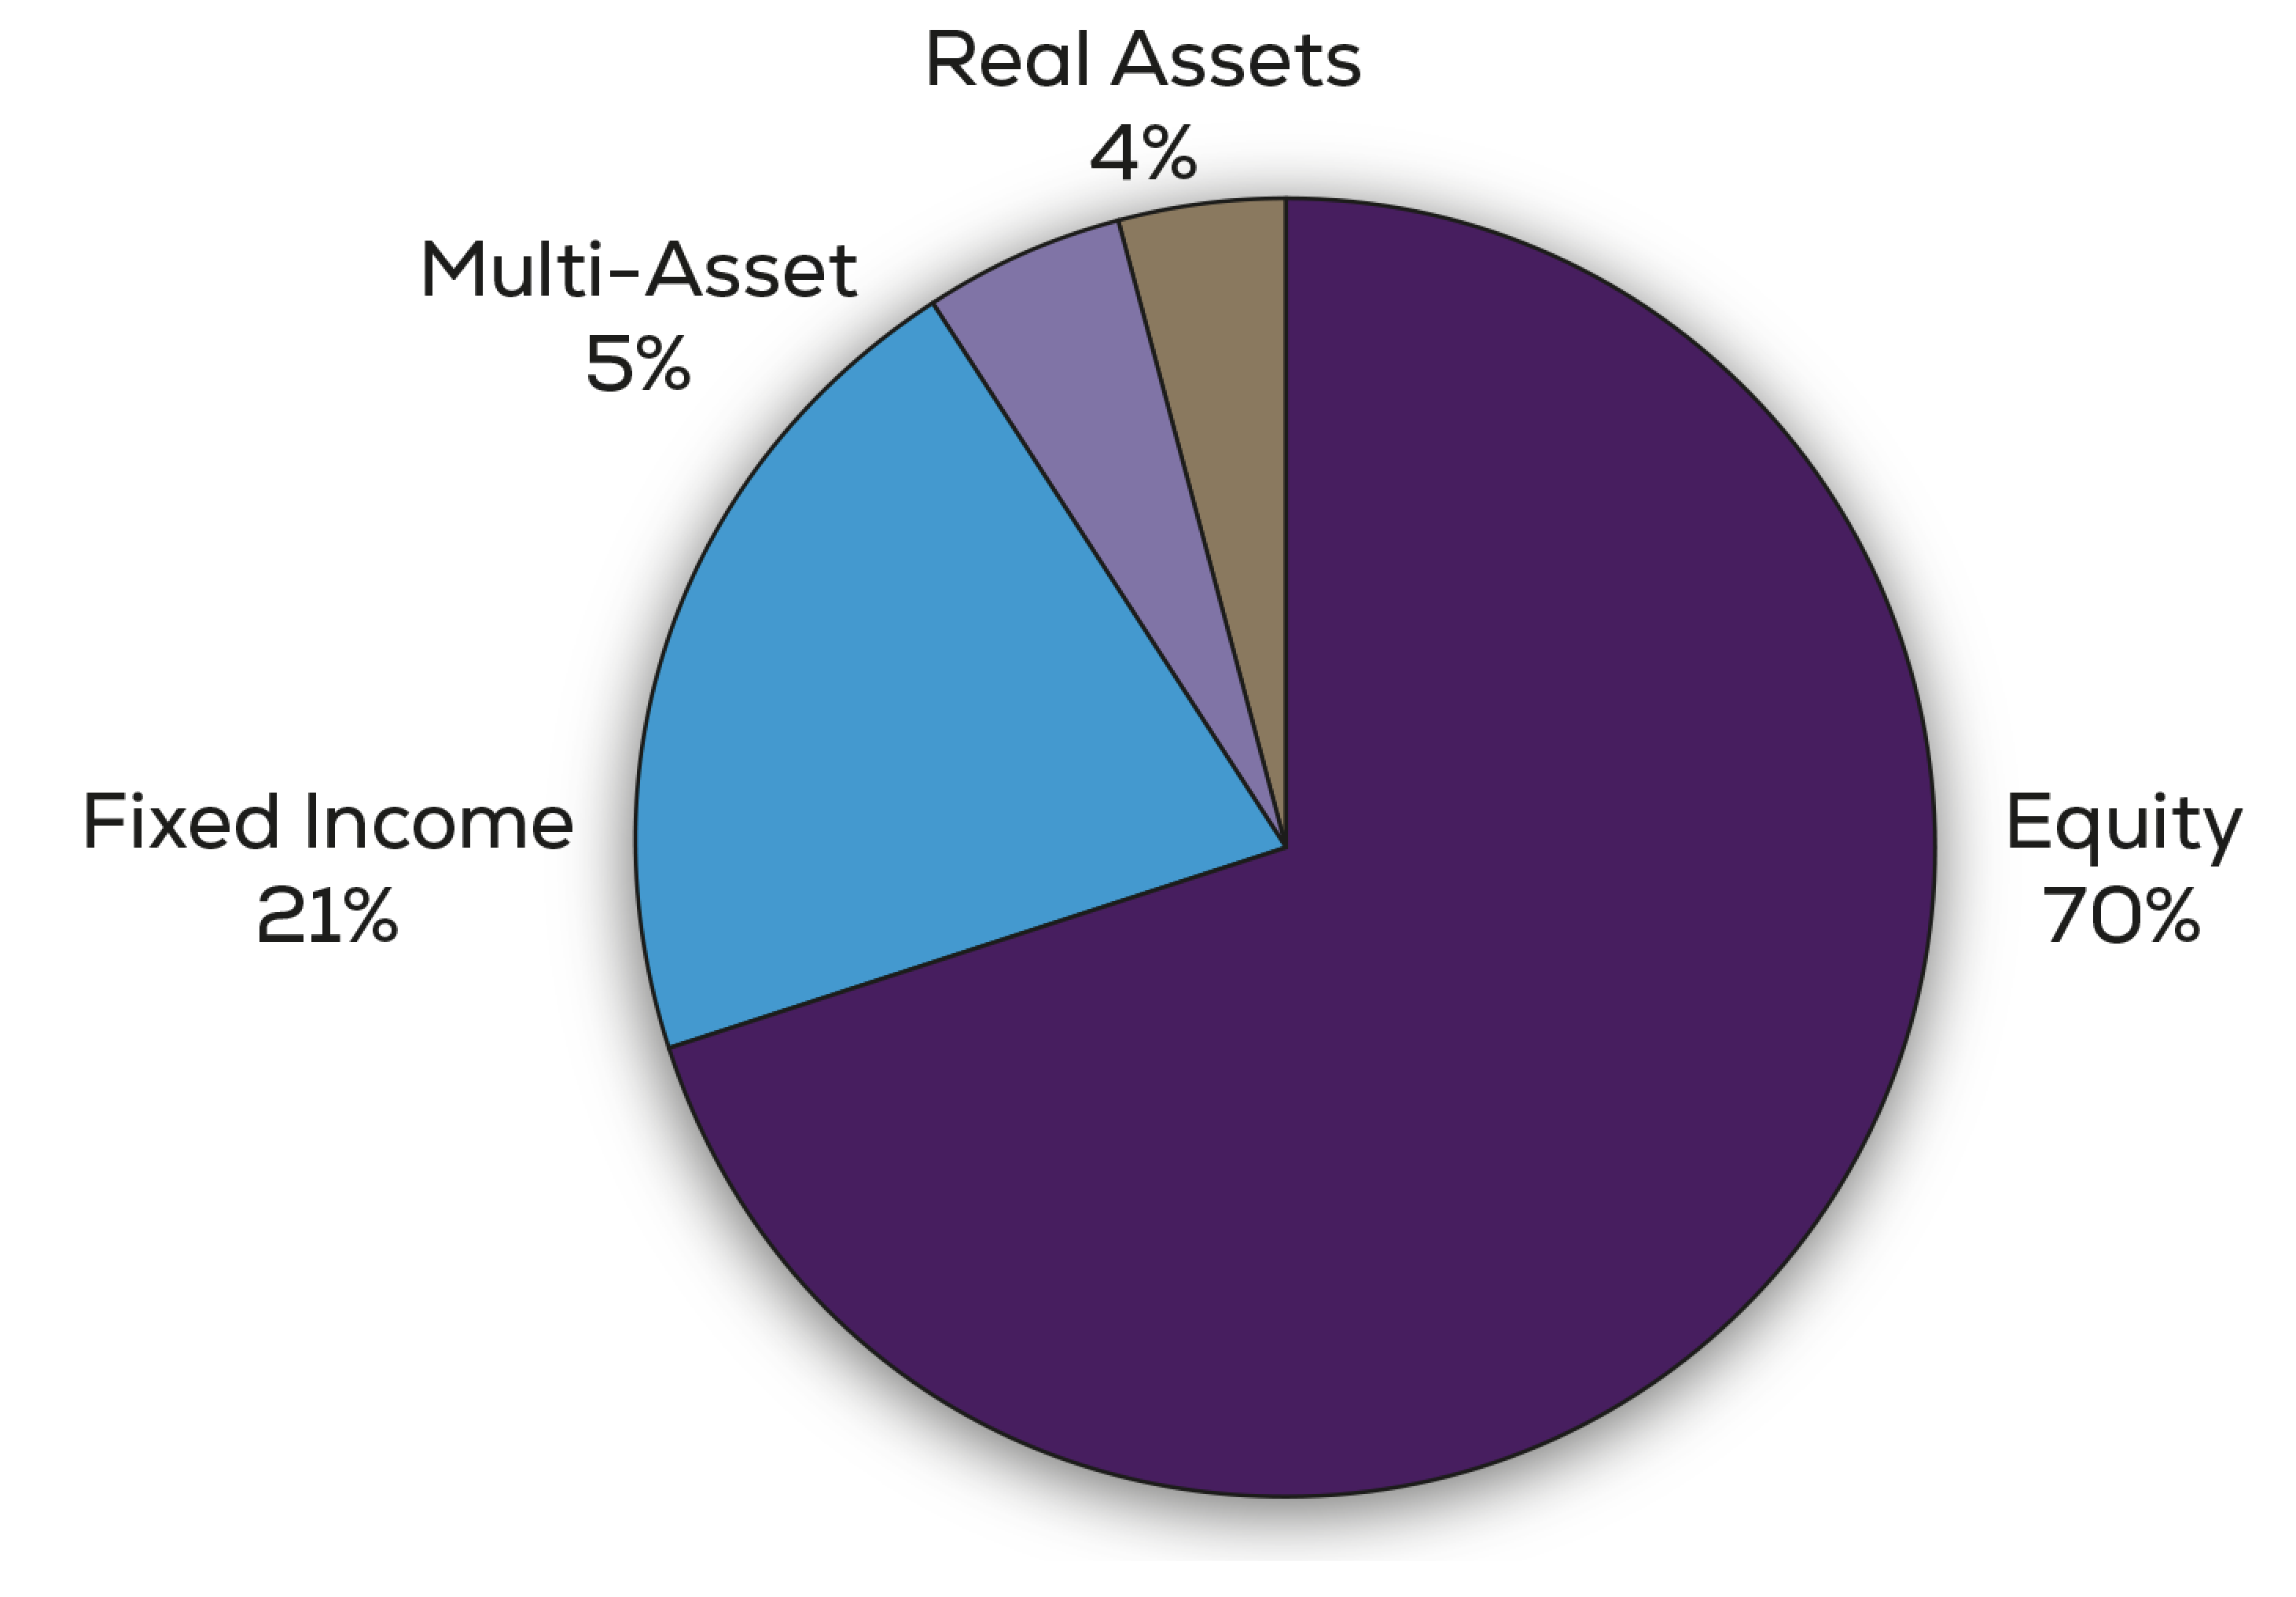 Foundation Investment Policy:Equity=70%, Fixed Income 21%, Multi-asset 5%, Real Assets 4%.